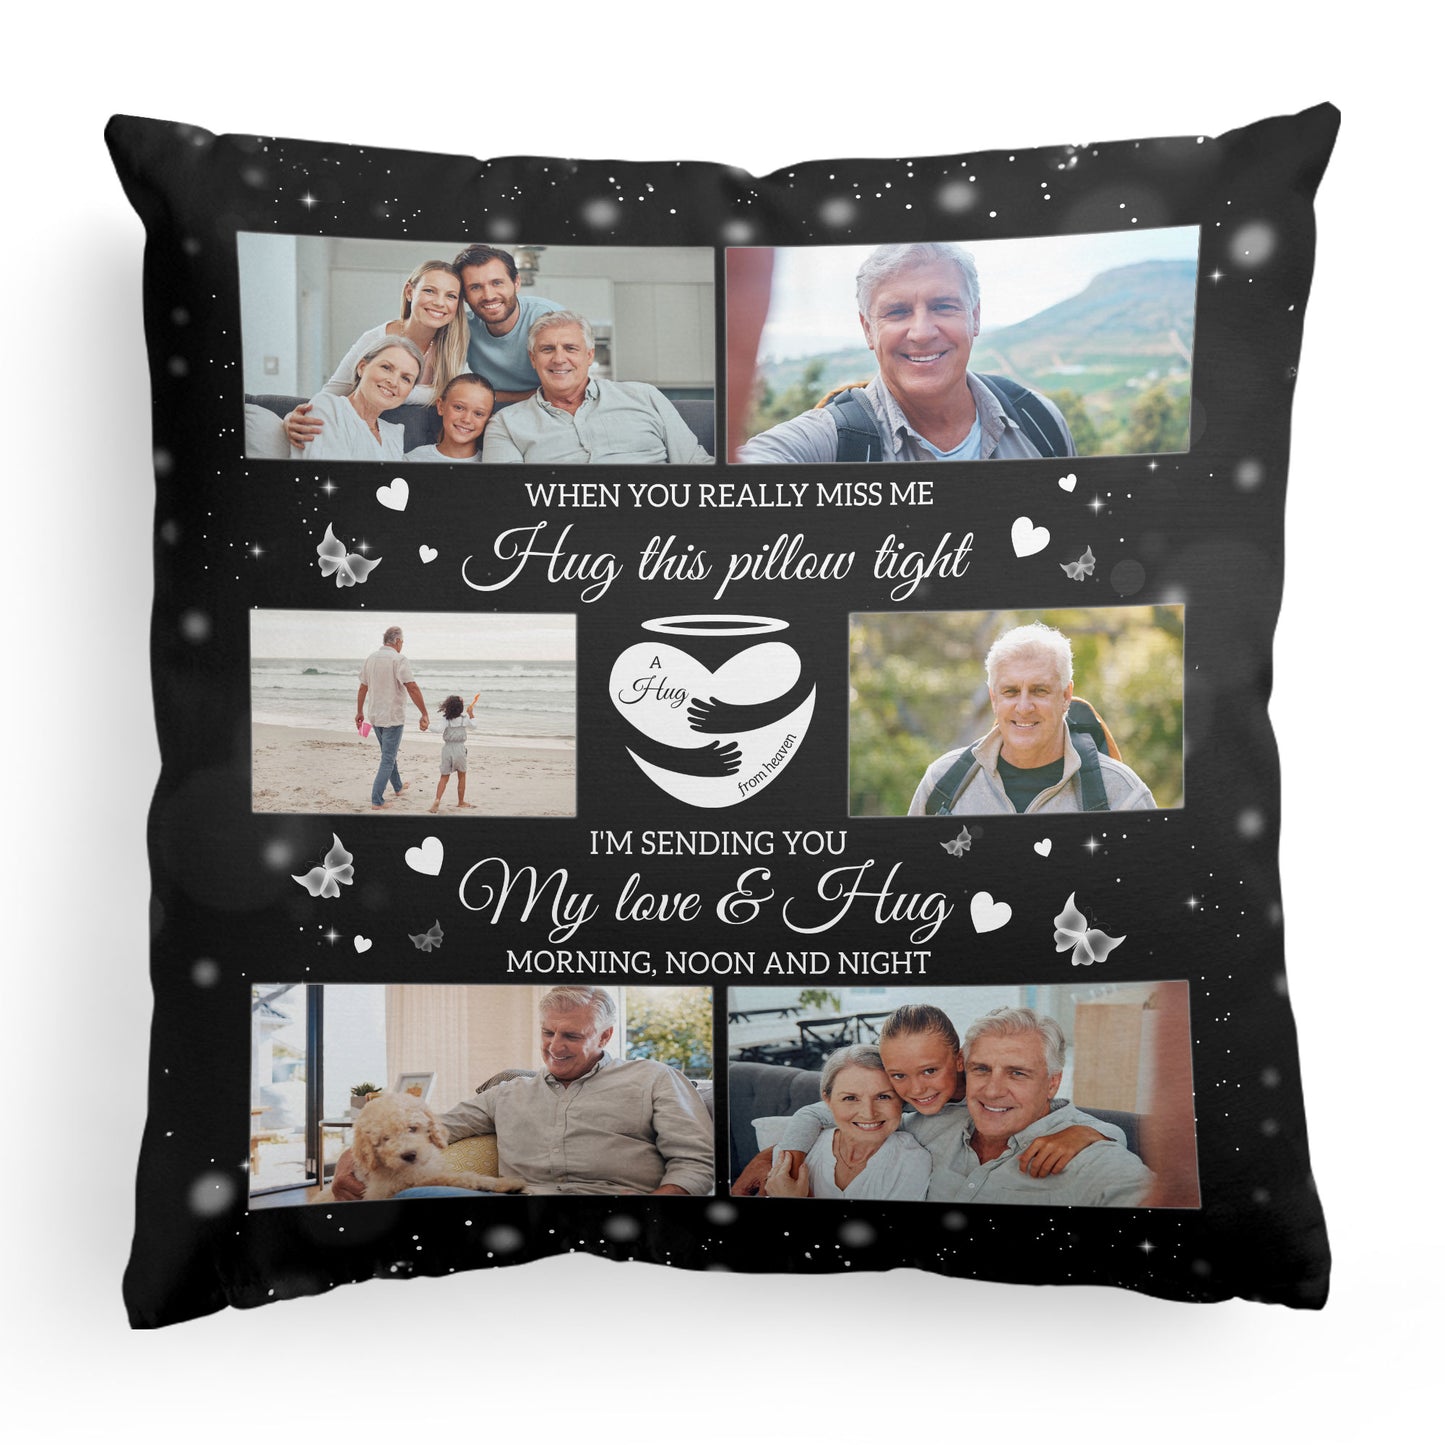 When You Miss Me Hug This Pillow - Personalized Photo Pillow